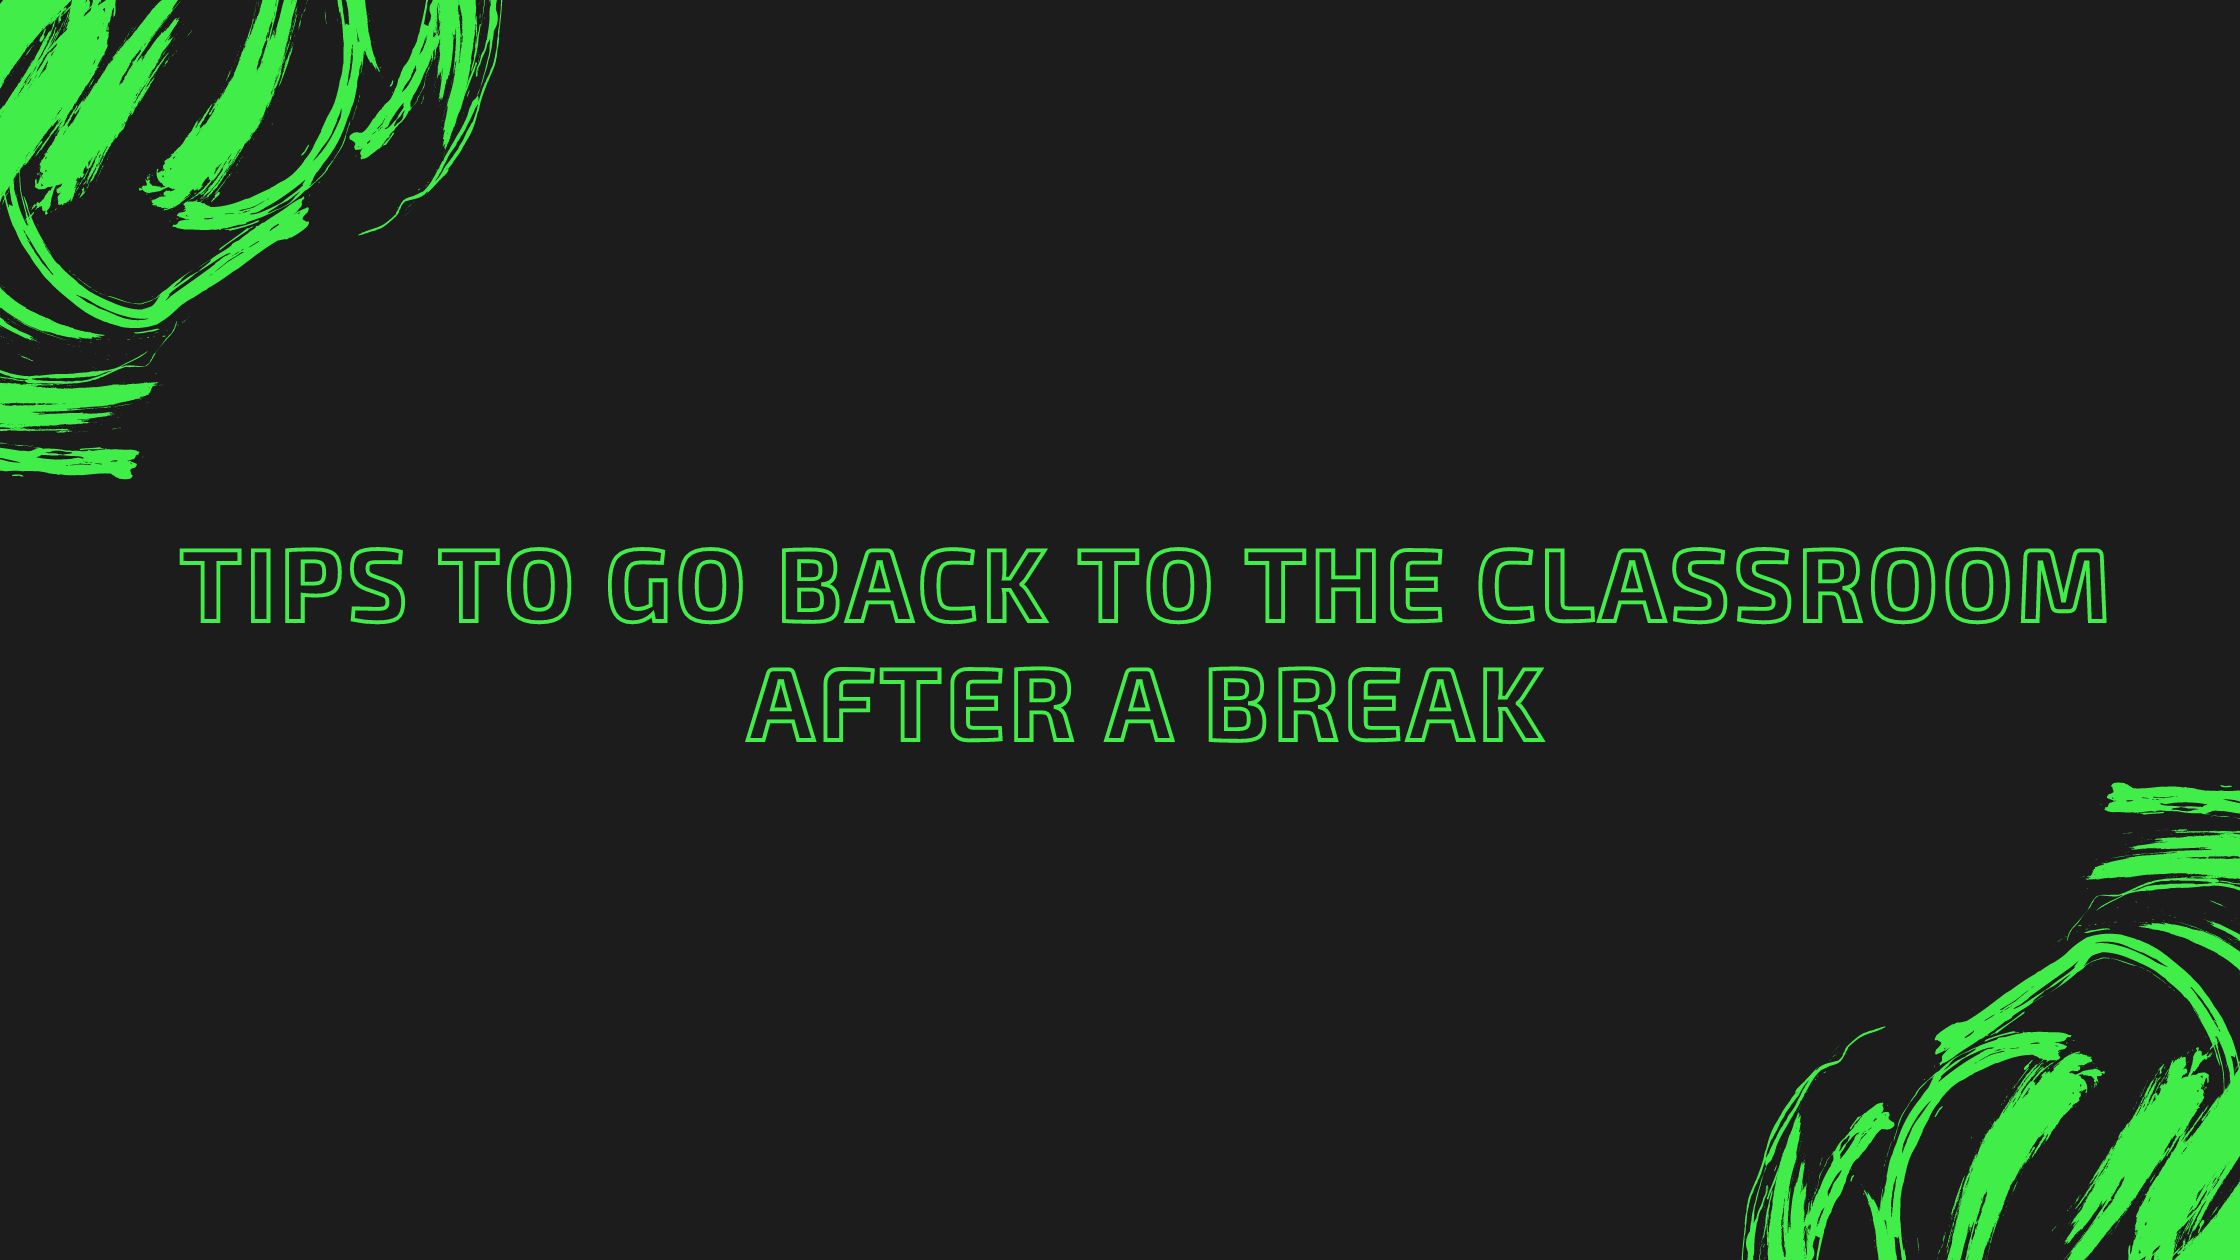 Tips to Go Back to the Classroom After a Break